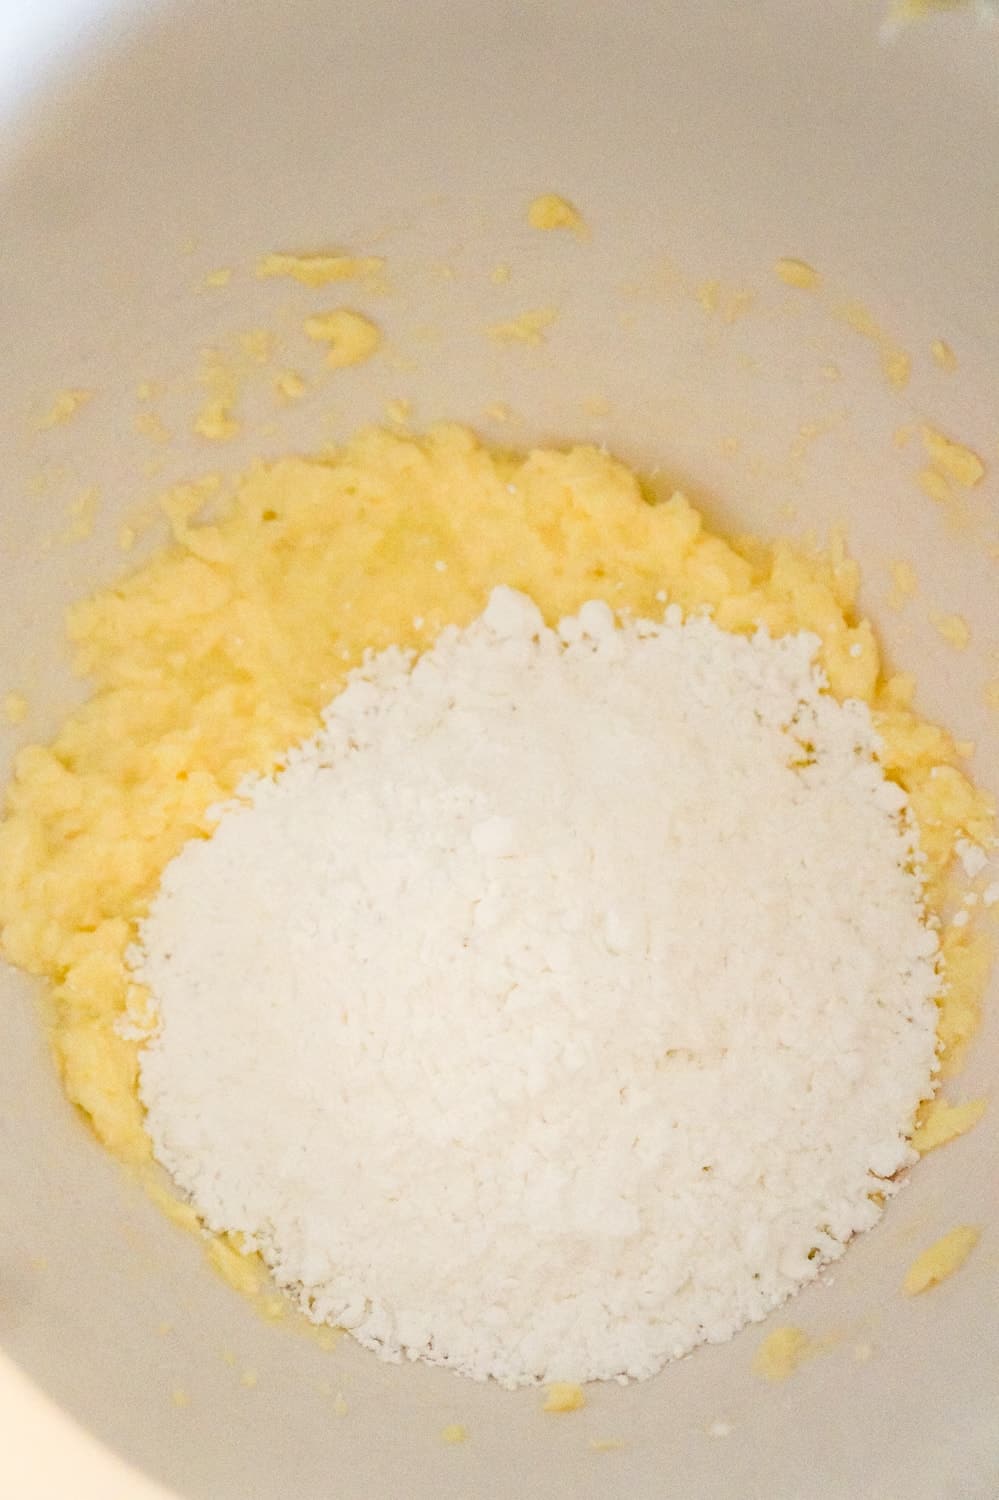 icing sugar on top of butter and egg white mixture